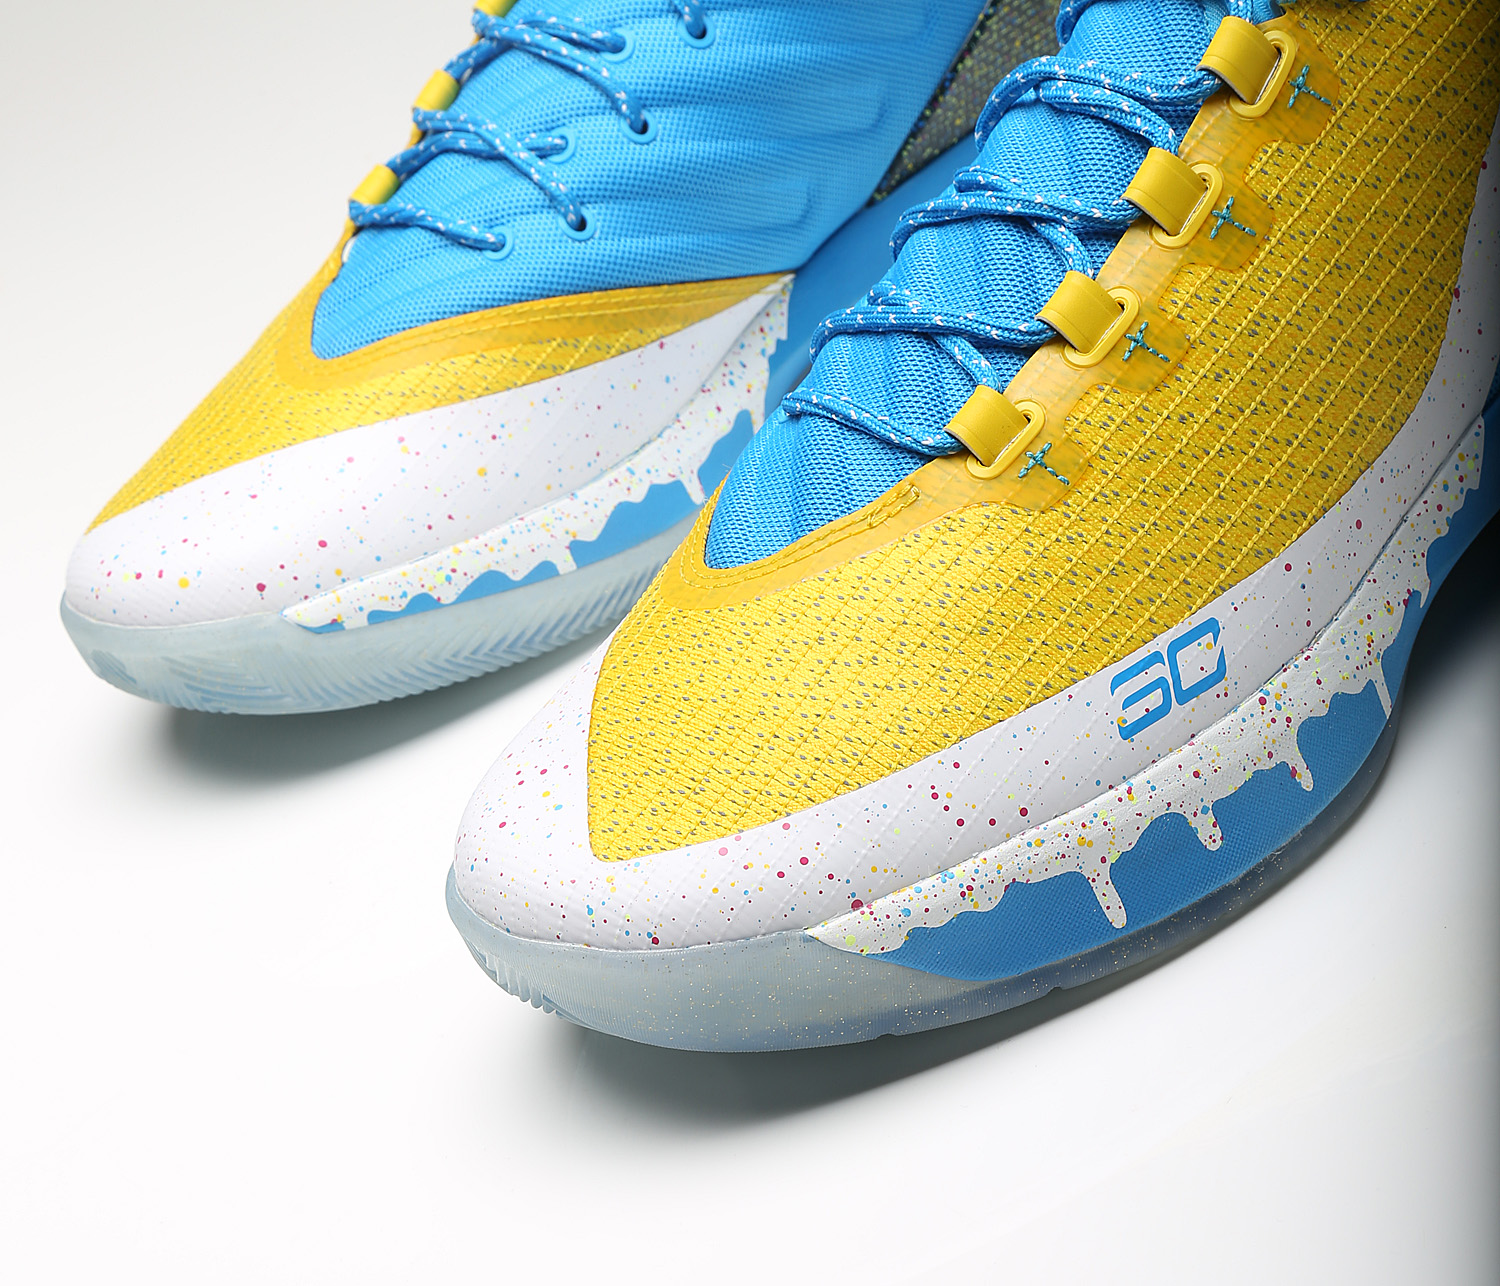 Stephen Curry wants you to know his awful shoes are actually cool